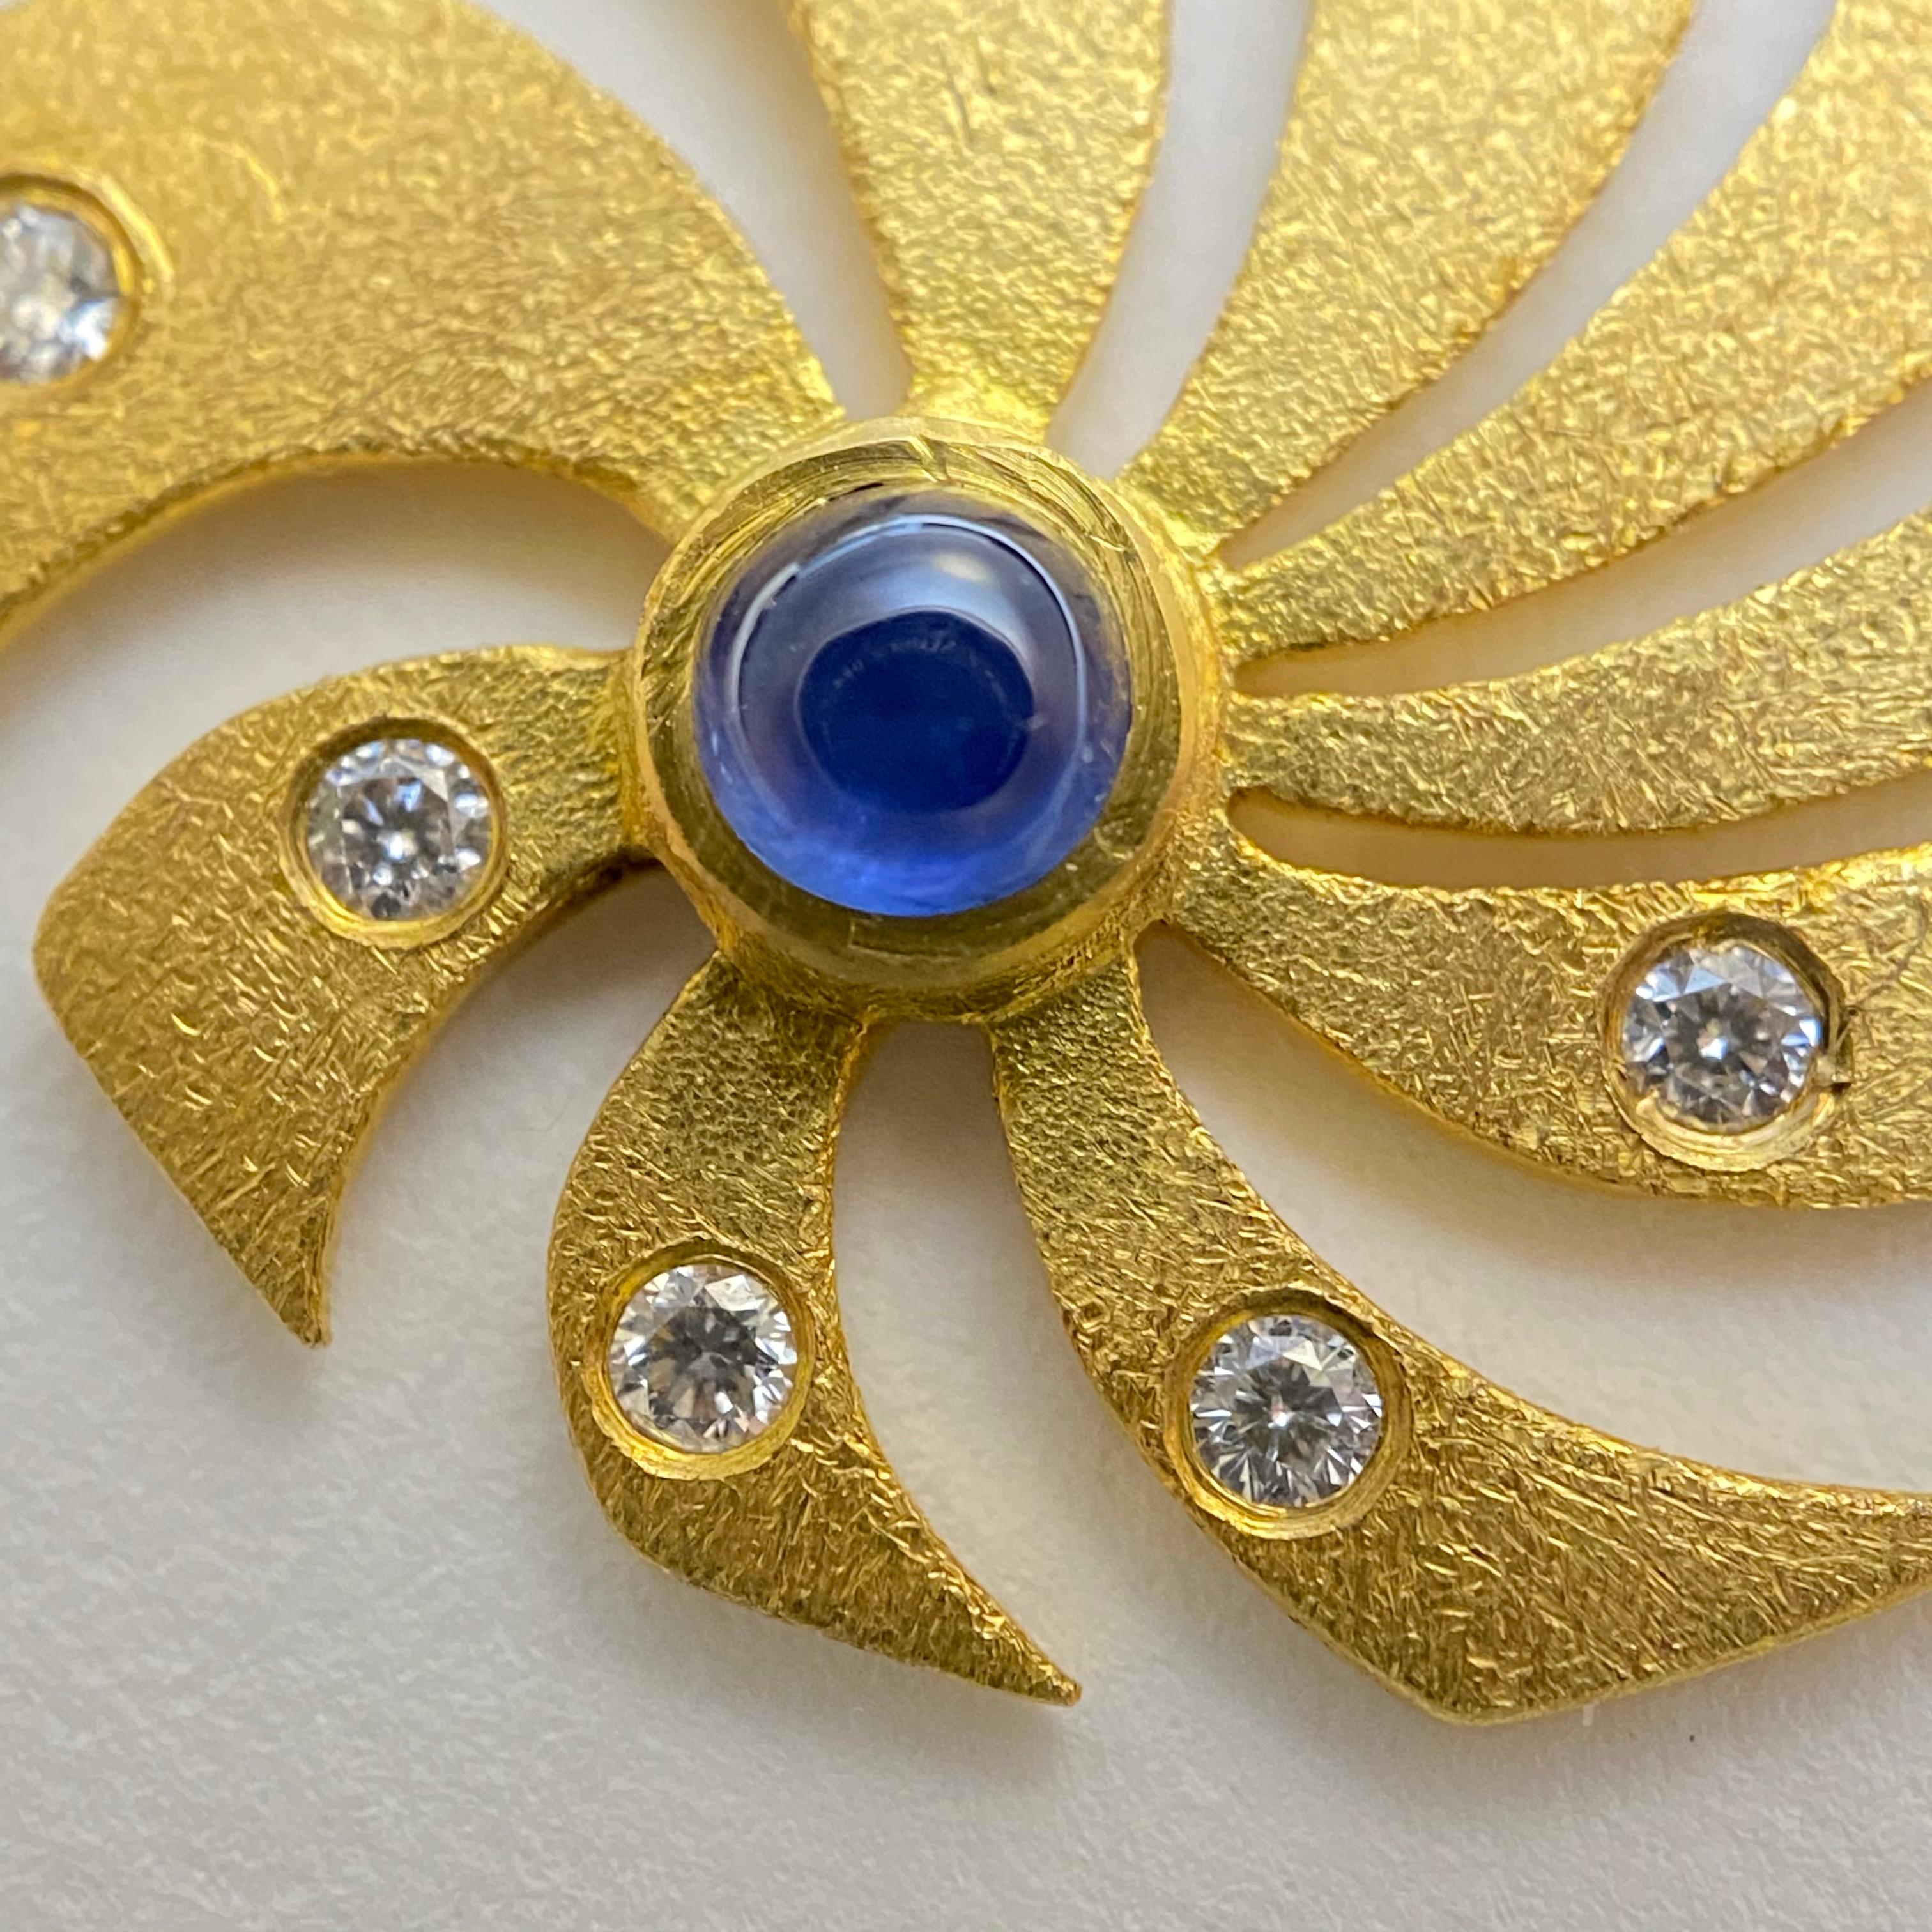 The delightful Pinwheel earrings feature two Cabochon Sapphires and brilliant cut diamonds. They are refreshingly playful. The gold is sand blasted, and they finish in French wires on the ear, keeping with the upbeat spirit of the earrings.

A2